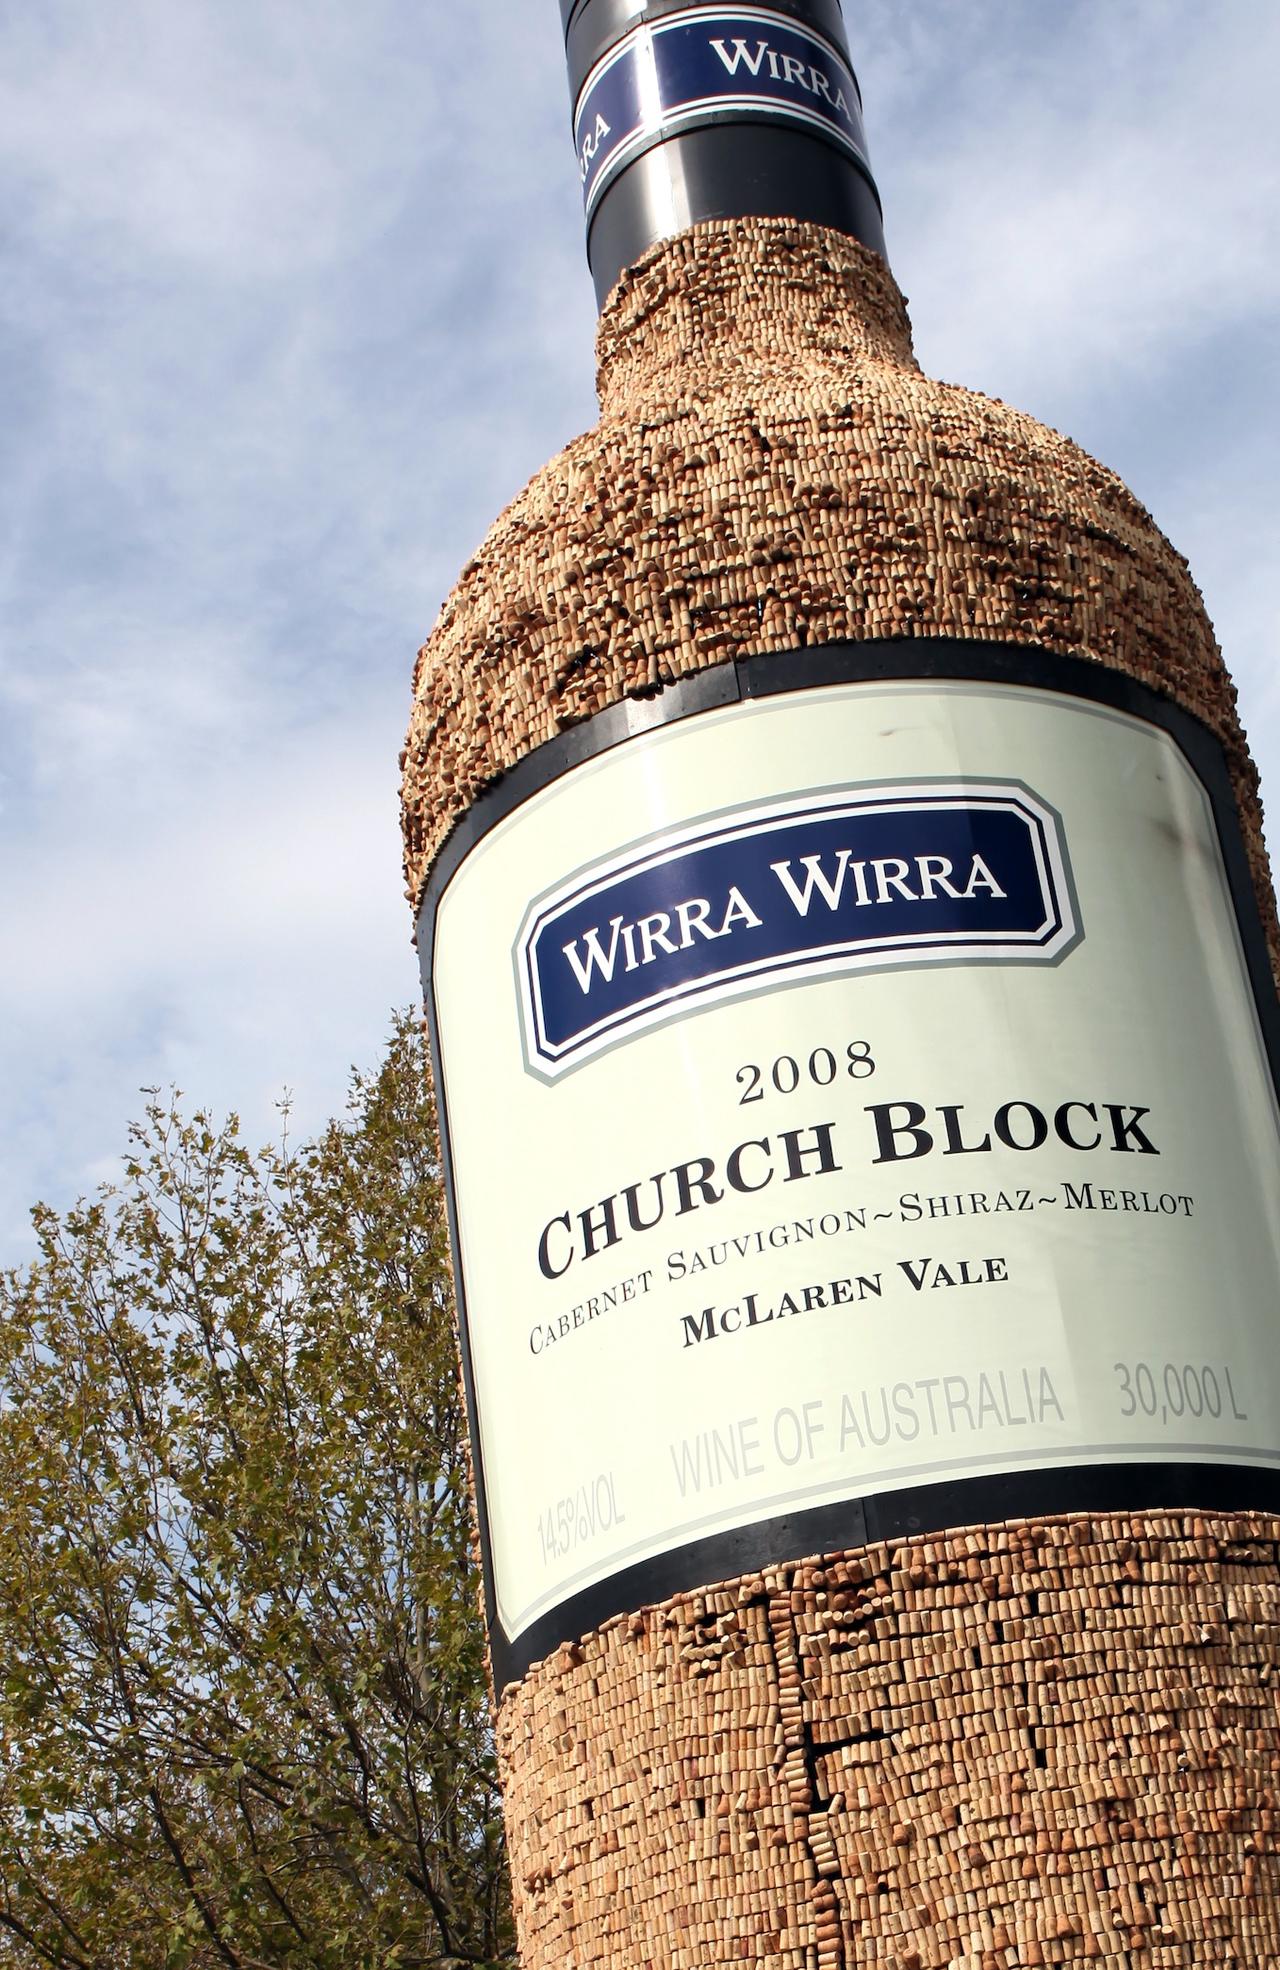 McLaren Vale's Wirra Wirra winery's 10m high Church Block wine bottle made out of corks.